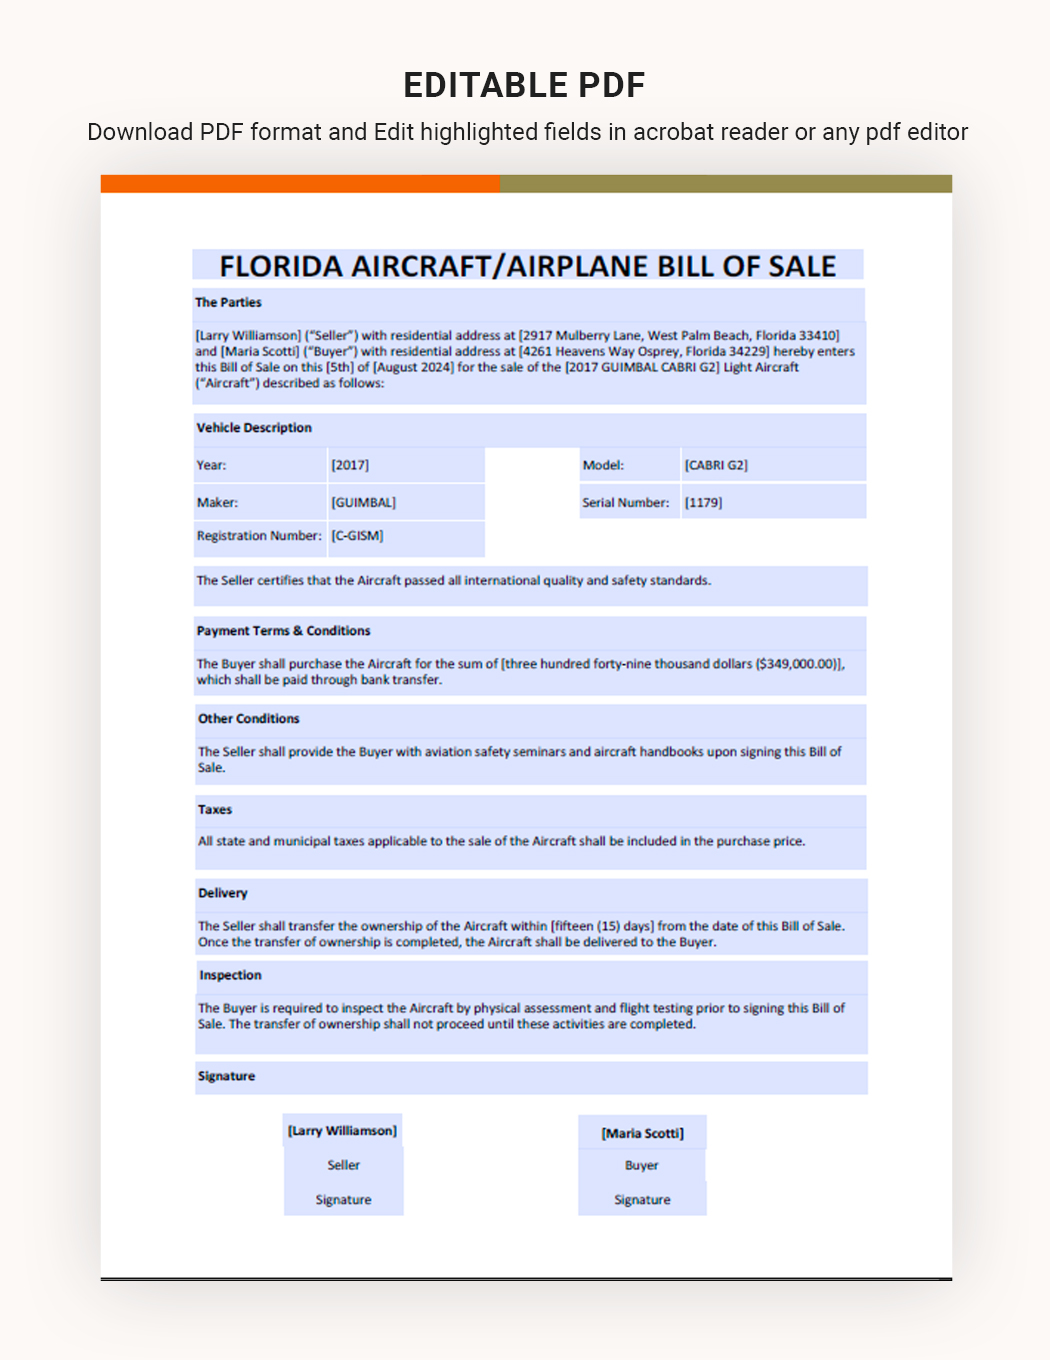 Florida Aircraft / Airplane Bill Of Sale Template